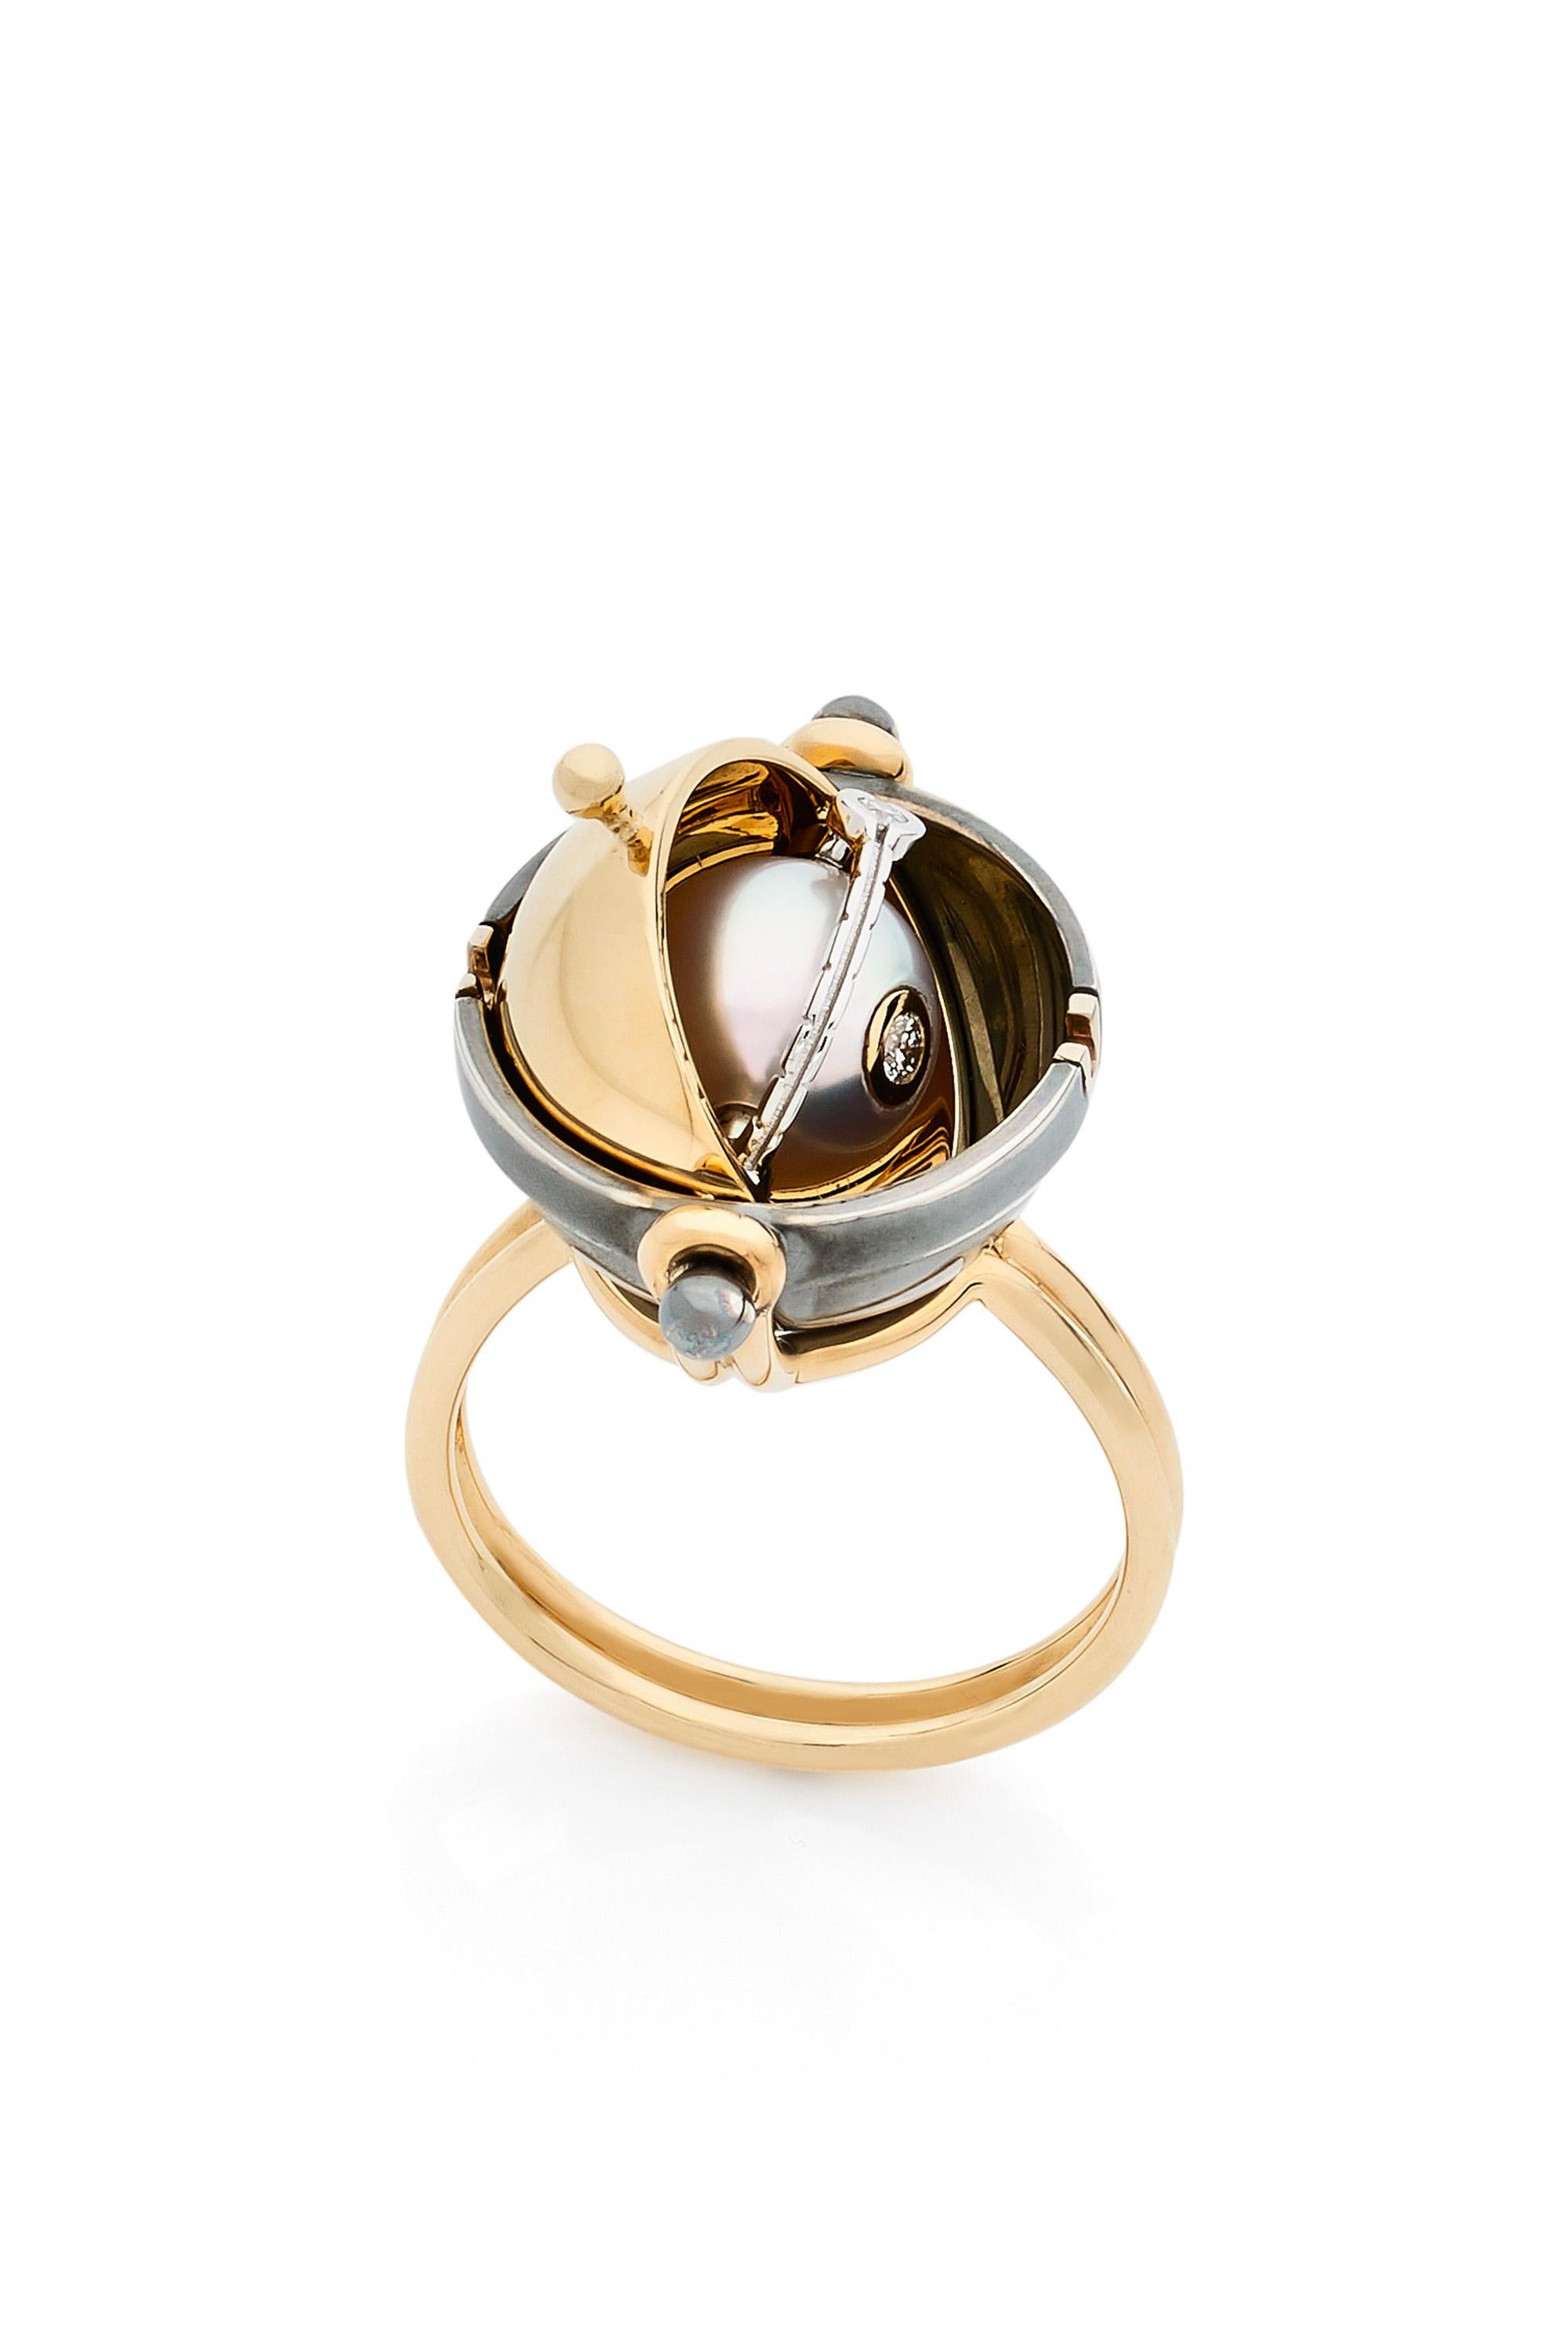 Diamond Sphere Ring Akoya Pearl by Elie Top. Gold and distressed silver ring. Rotating sphere revealing an akoya pearl set with a diamond and encircled by a white gold and diamonds ring. 

Information:
Akoya Pearl 
1 Diamond: 0.045 cts
18k Gold: 9